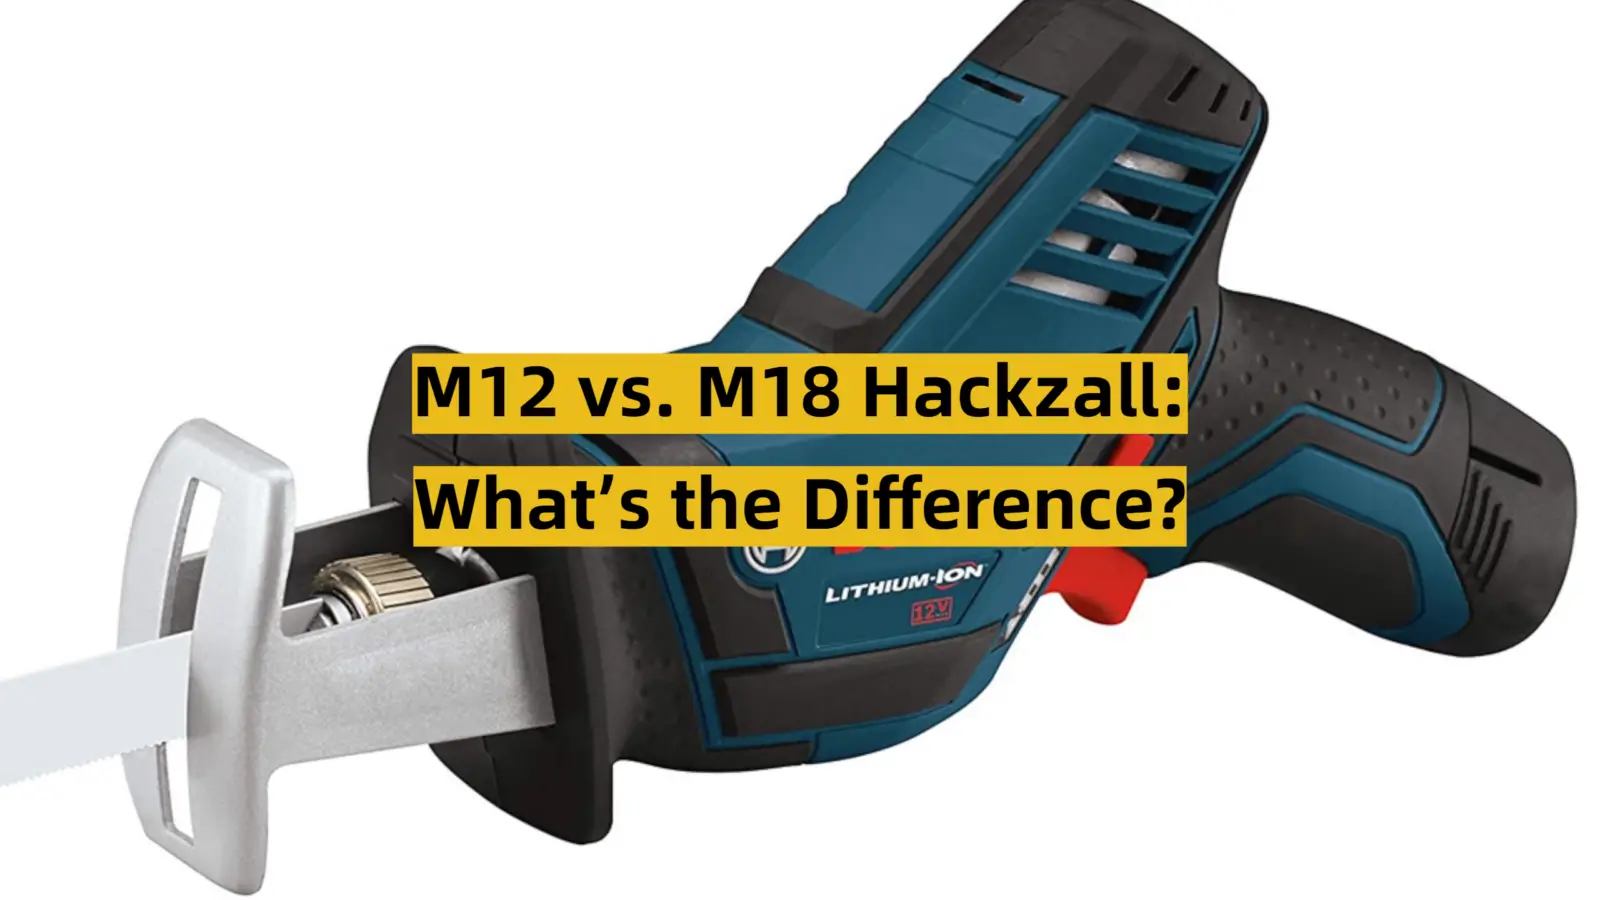 M12 vs. M18 Hackzall: What’s the Difference?